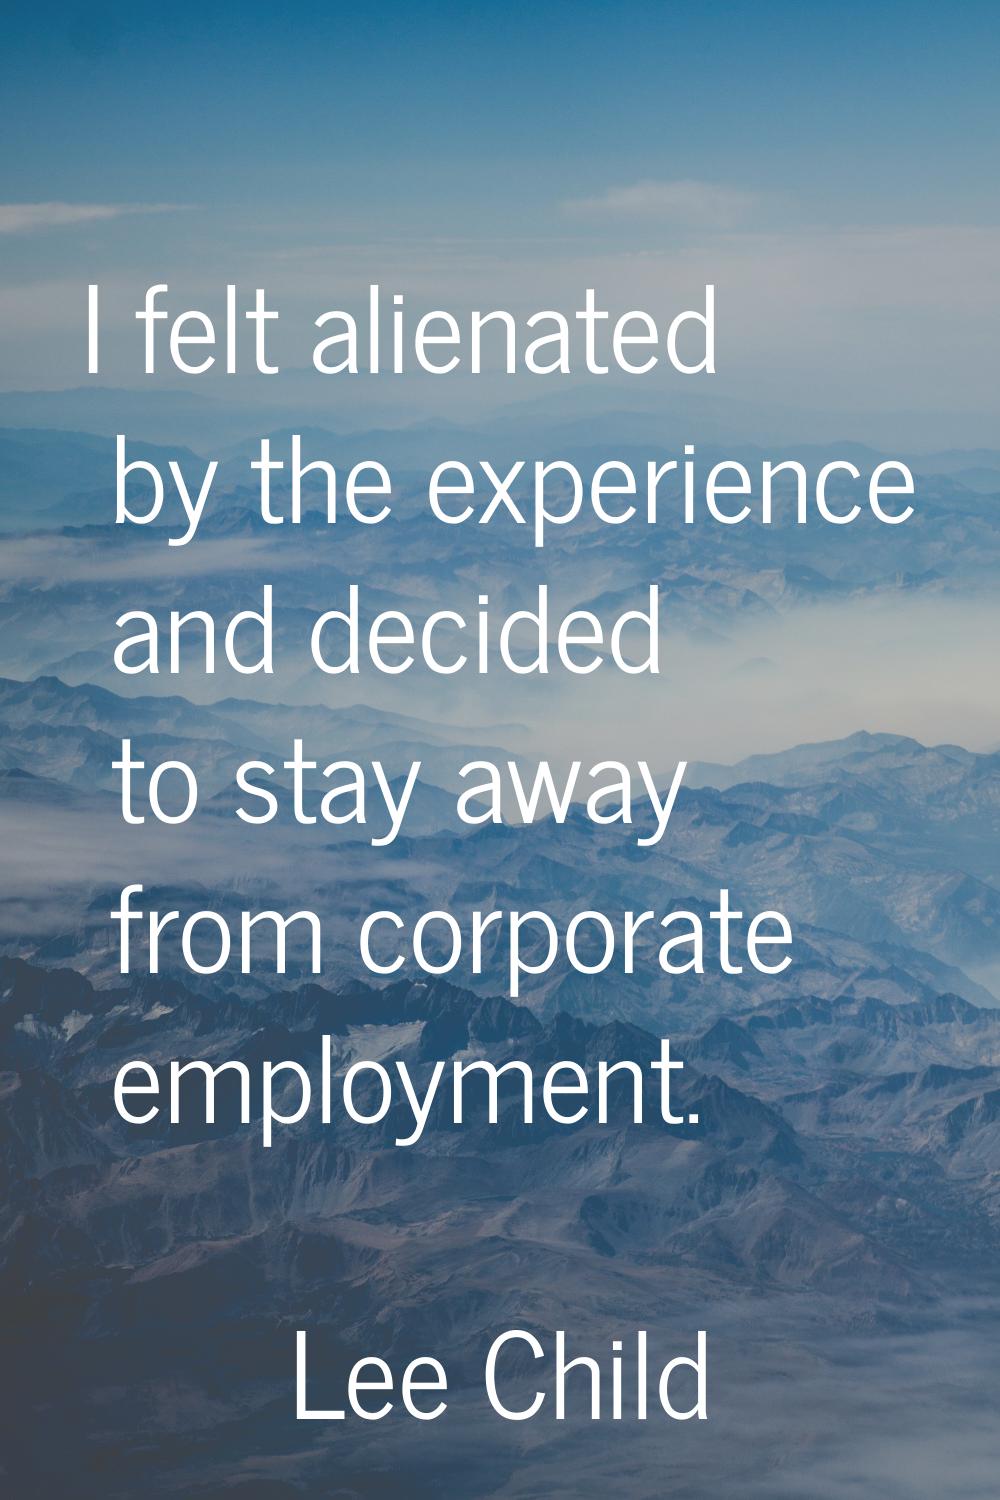 I felt alienated by the experience and decided to stay away from corporate employment.